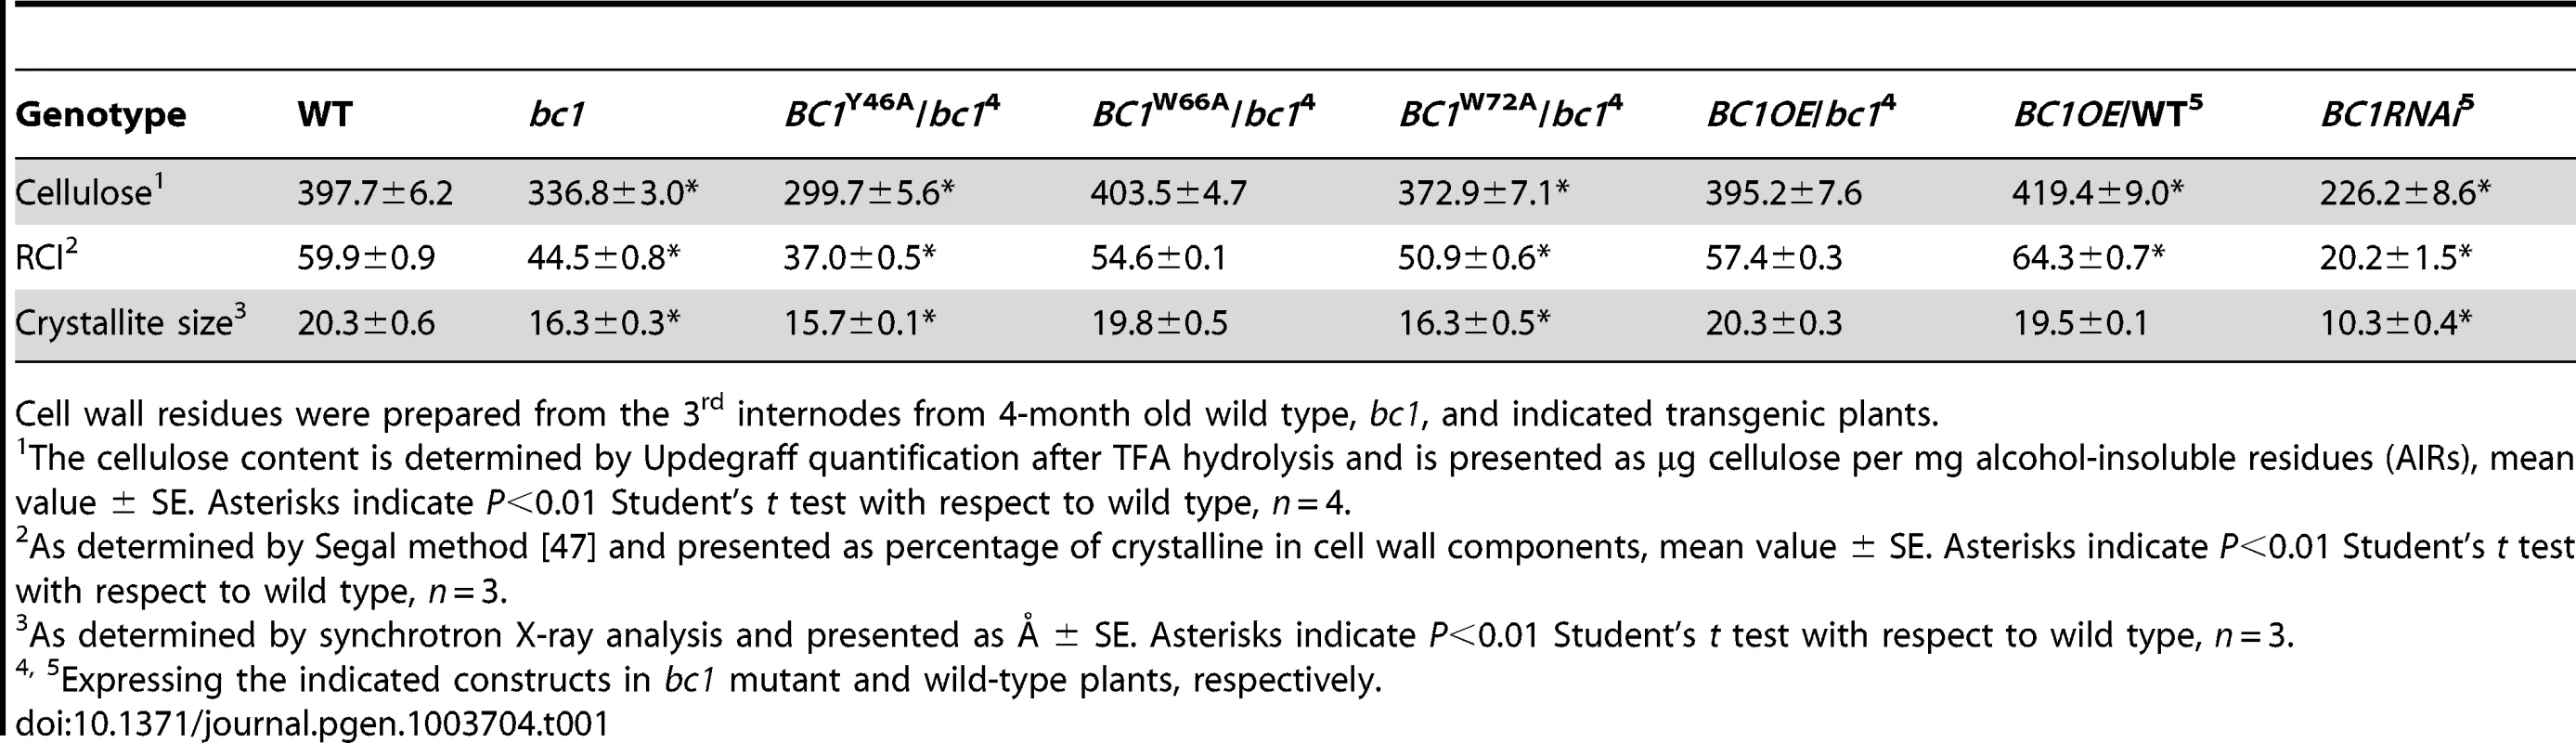 BC1 affects cellulose crystallite size and cellulose content.